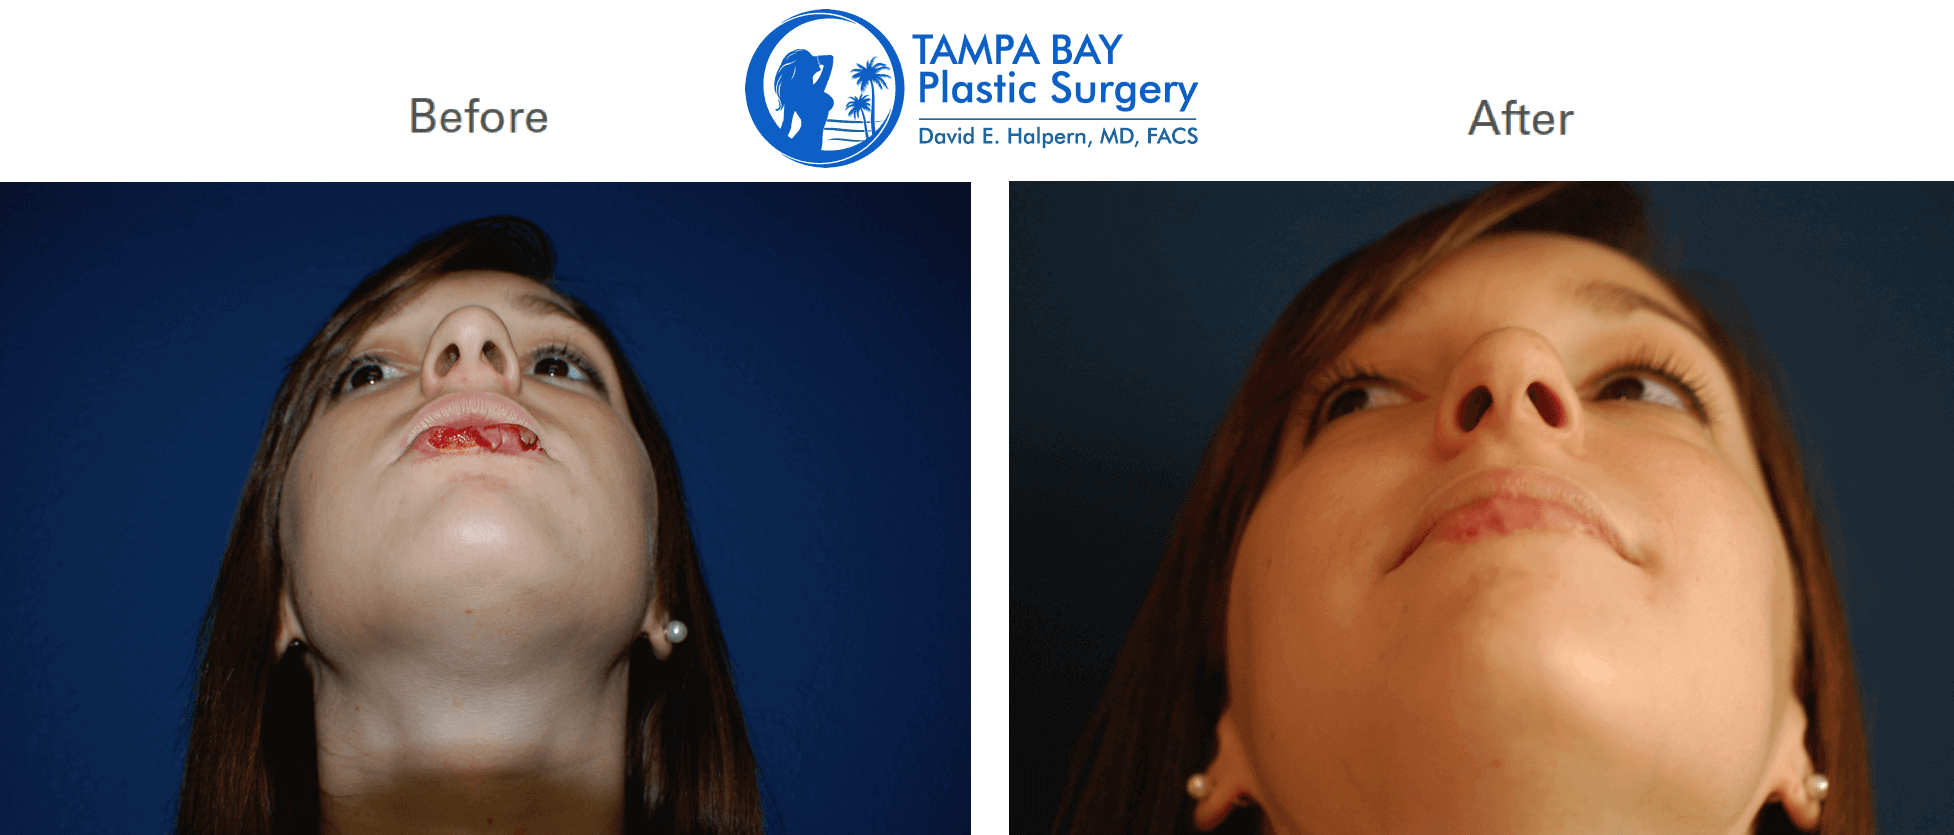 dog bite before after reconstructive surgery tampa